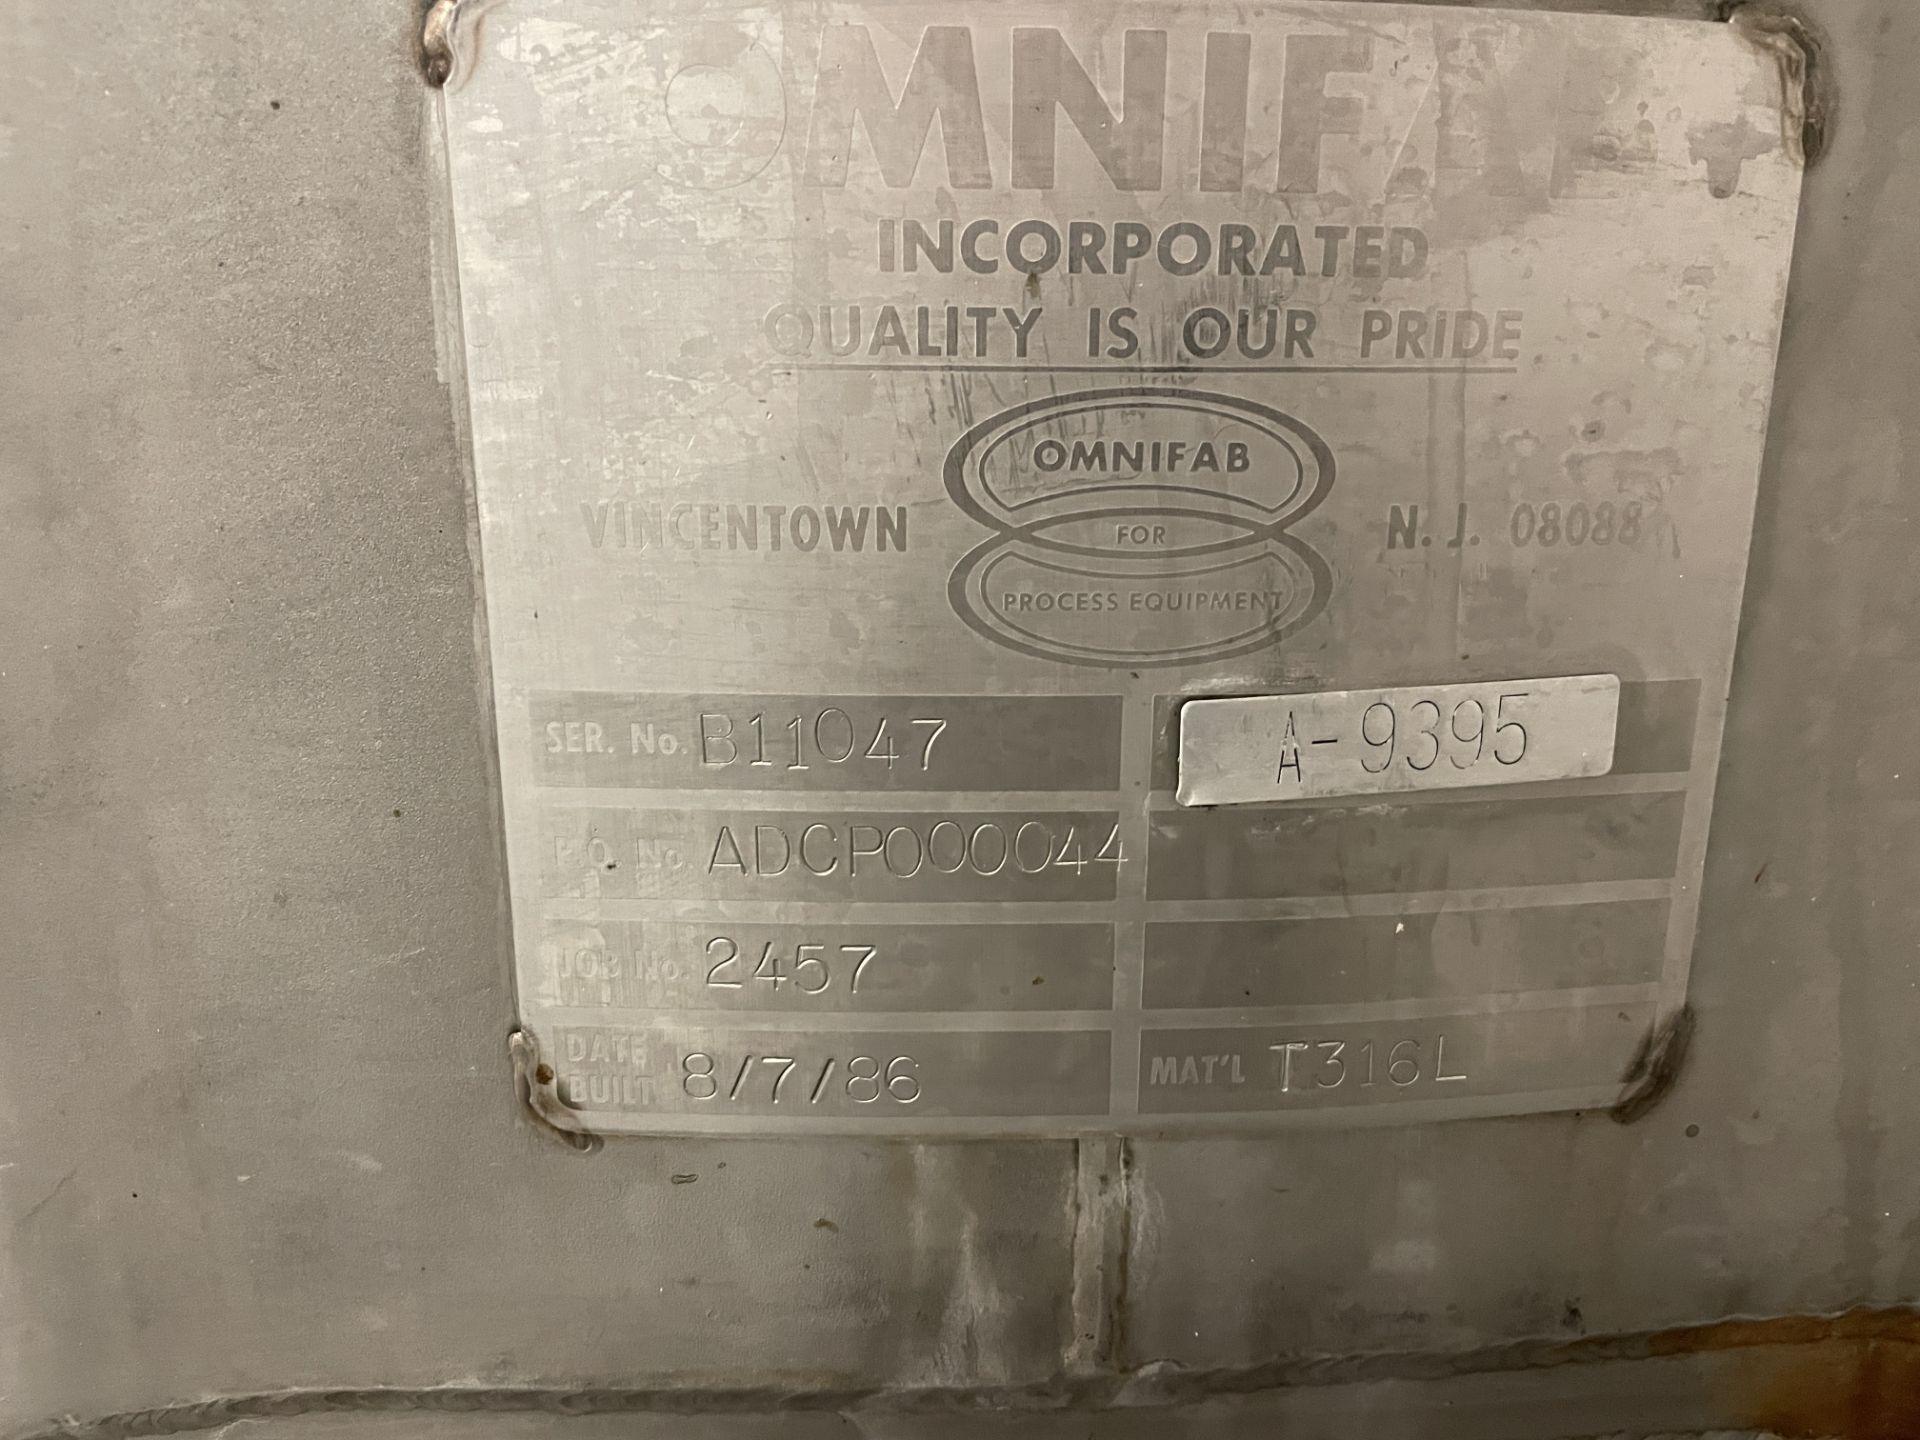 Asset 113 - Omnifab 250 Gallon Stainless Steel Jacketed Mixing Tank, 316 Stainless Steel, model - Image 2 of 10